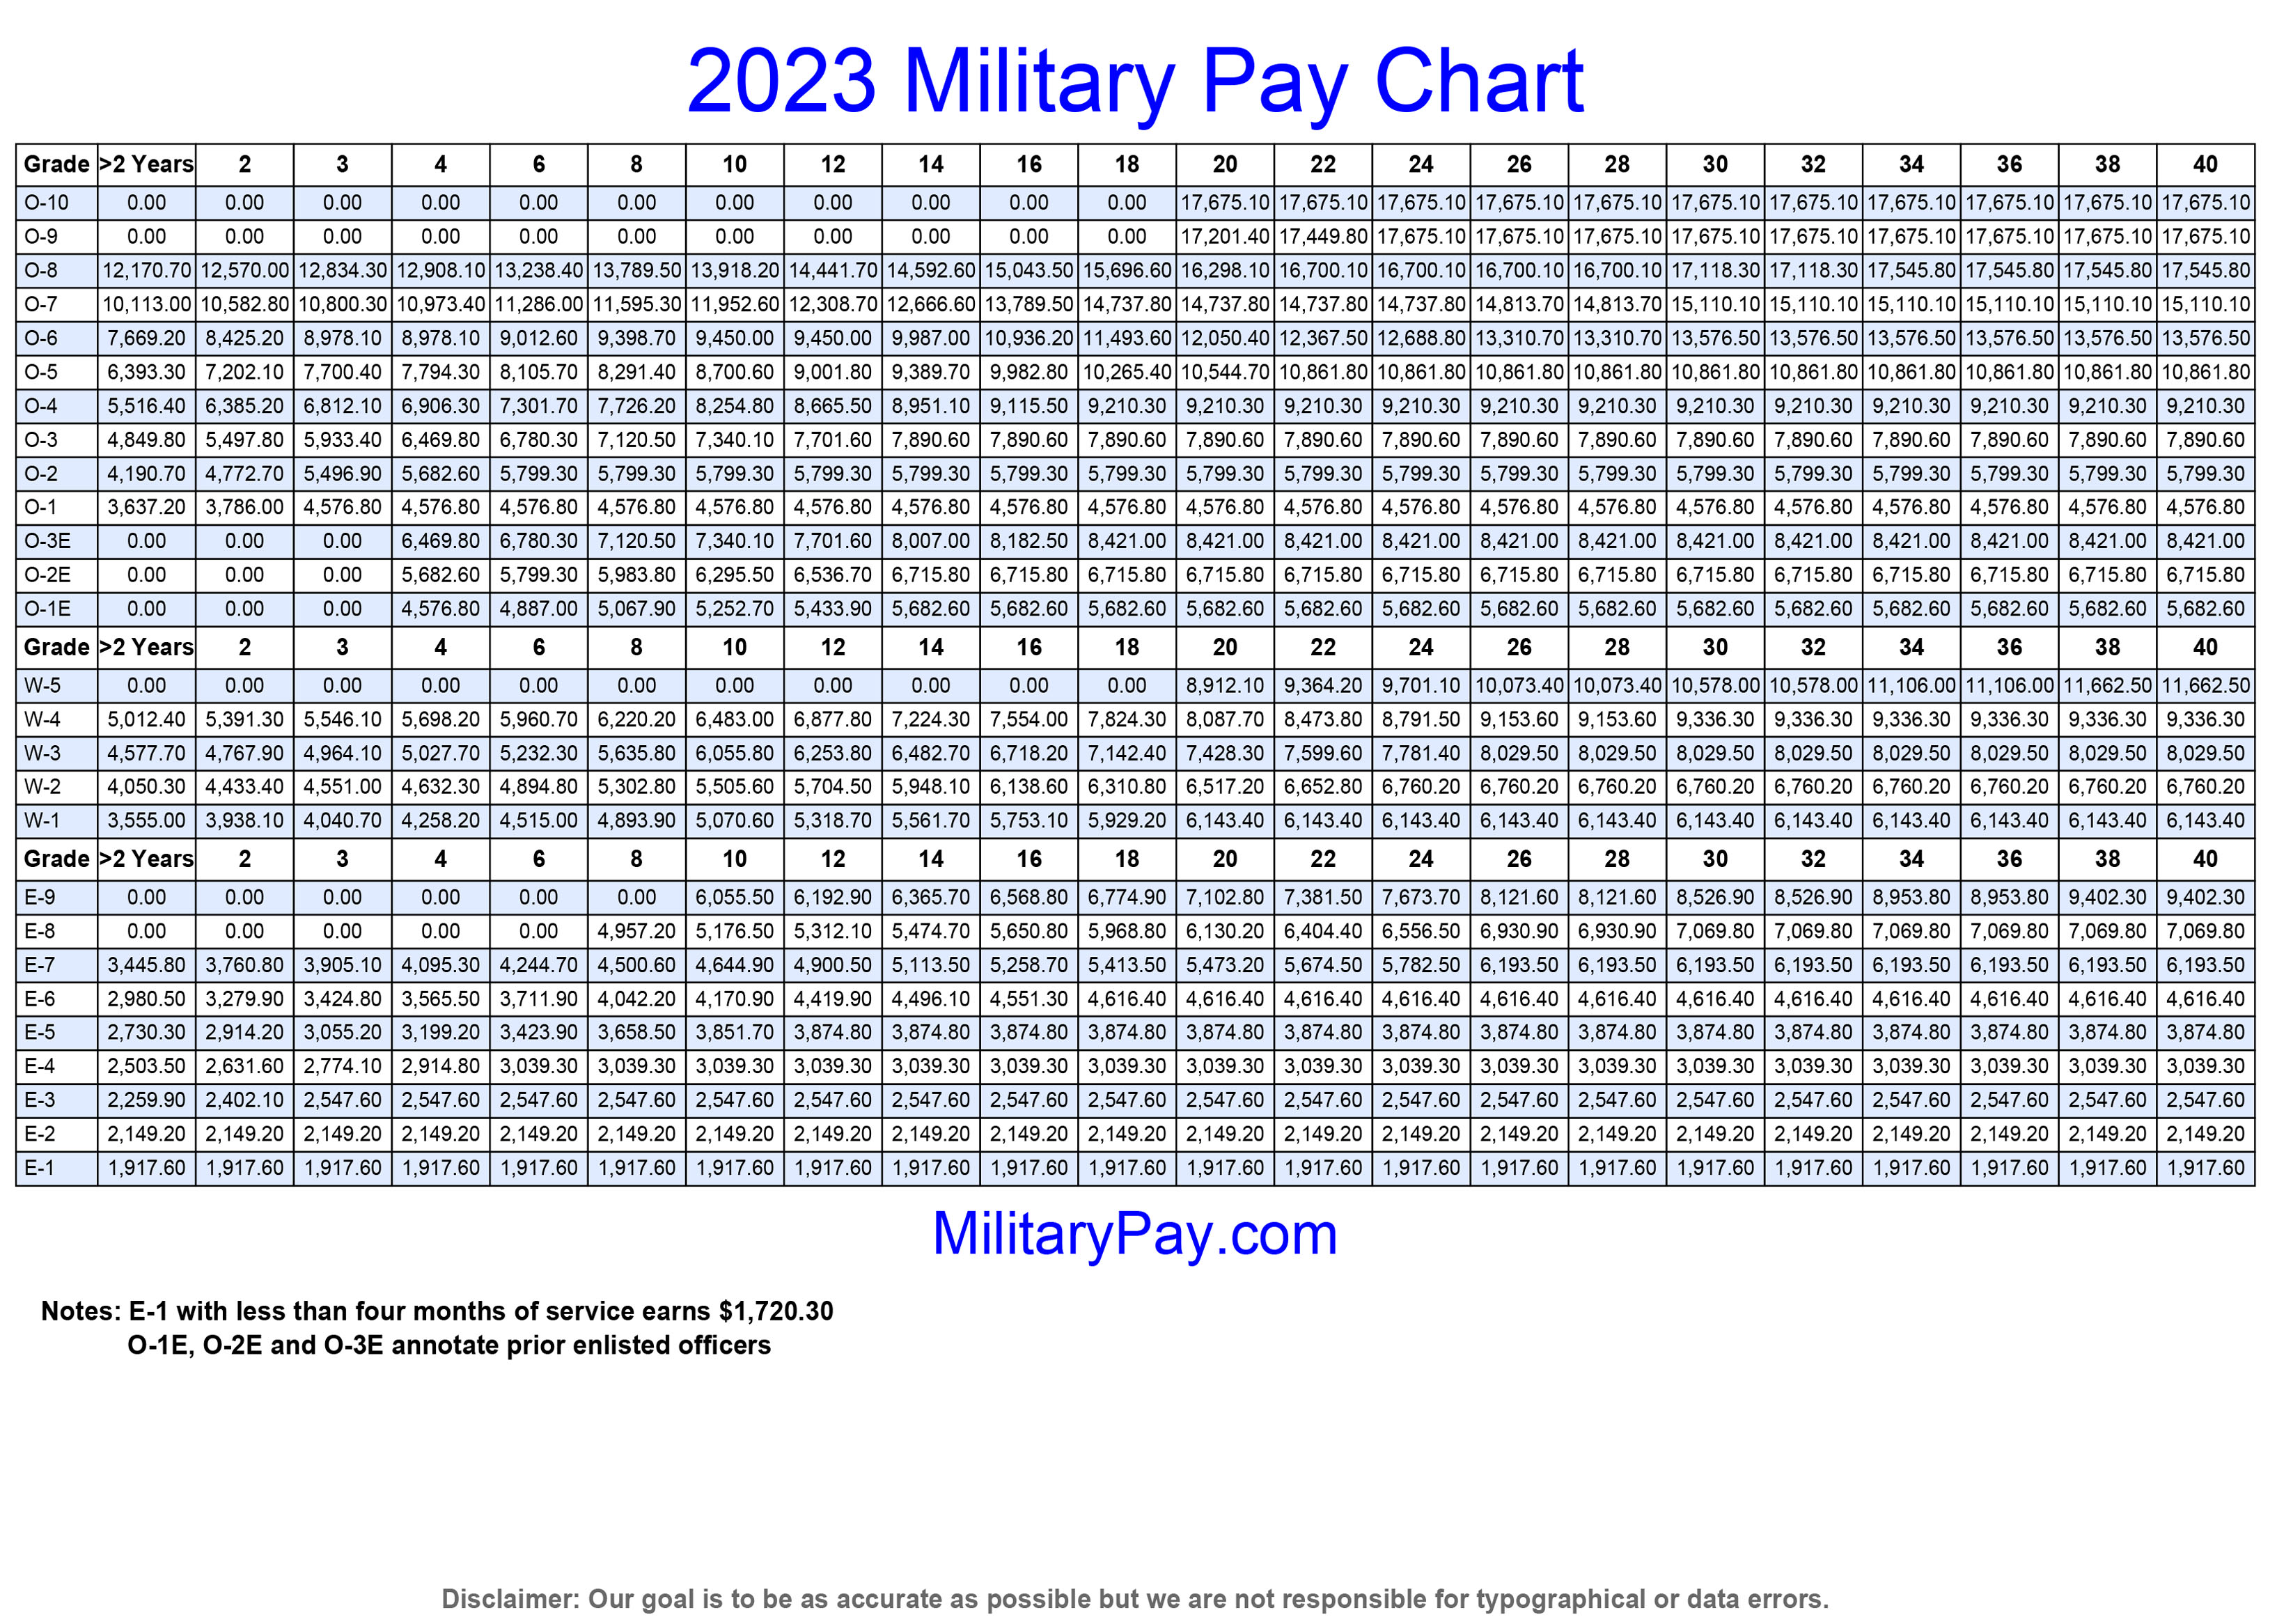 Military Pay Charts 1949 to 2023 plus estimated to 2050